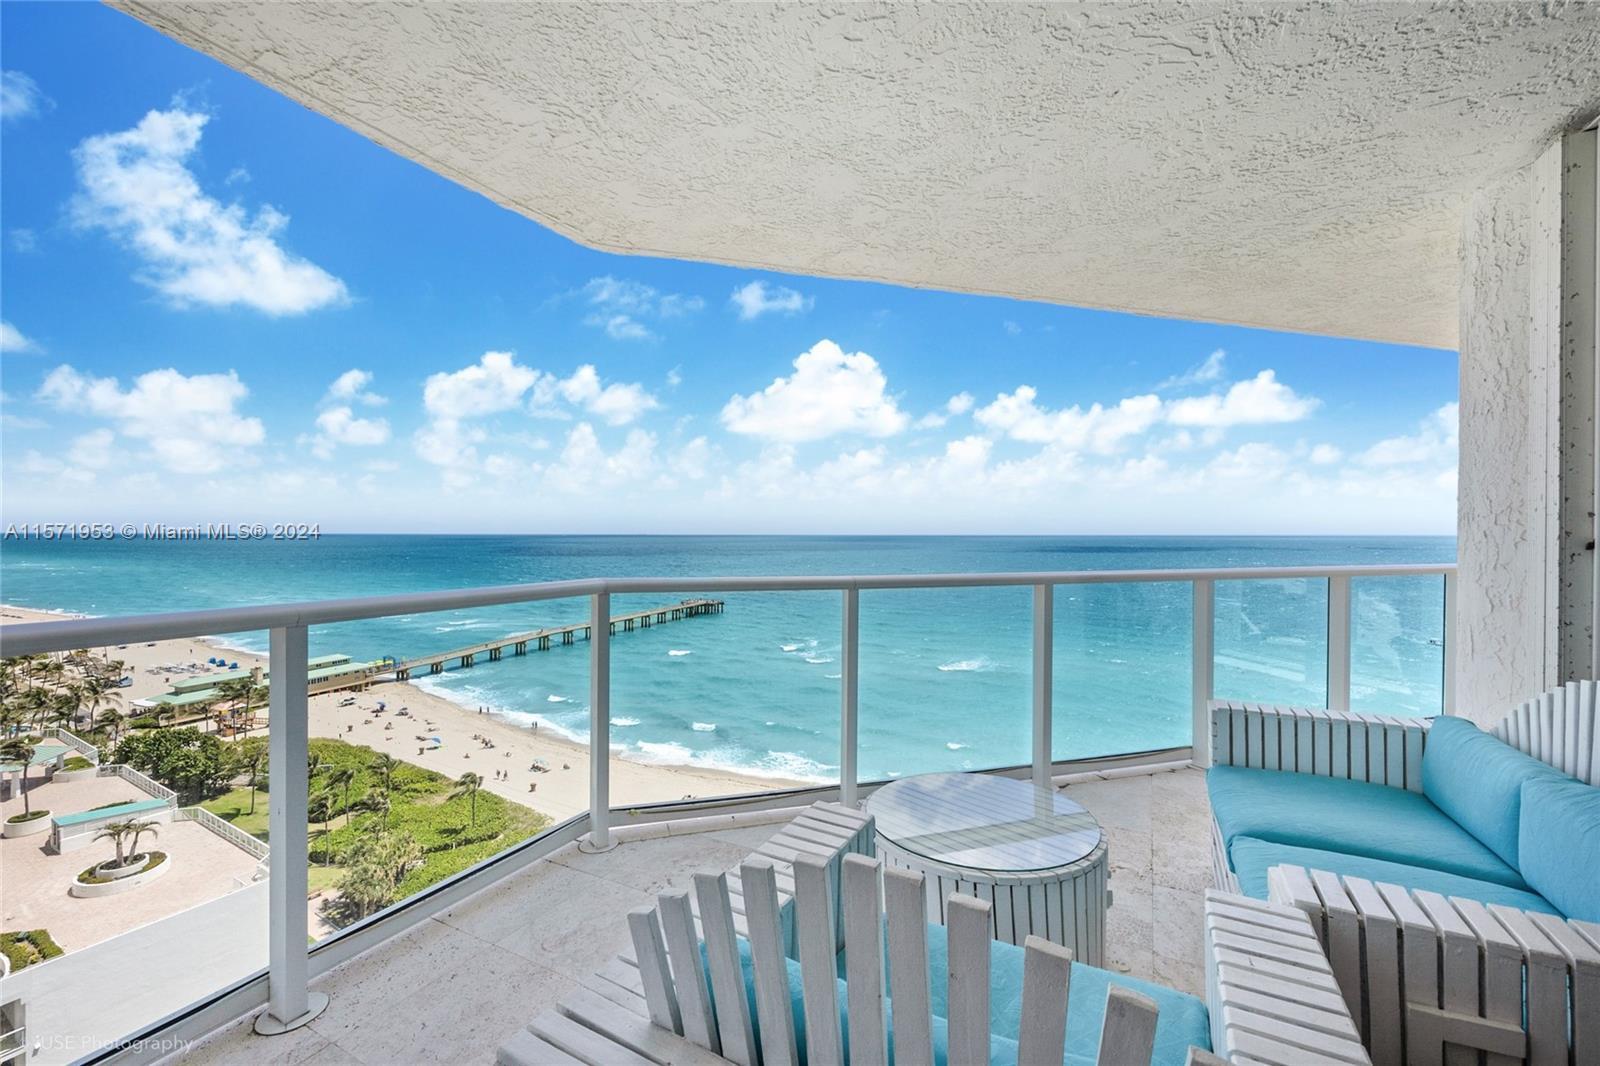 This stunning direct oceanfront residence boasts over 2,020 interior square feet and 374 square feet